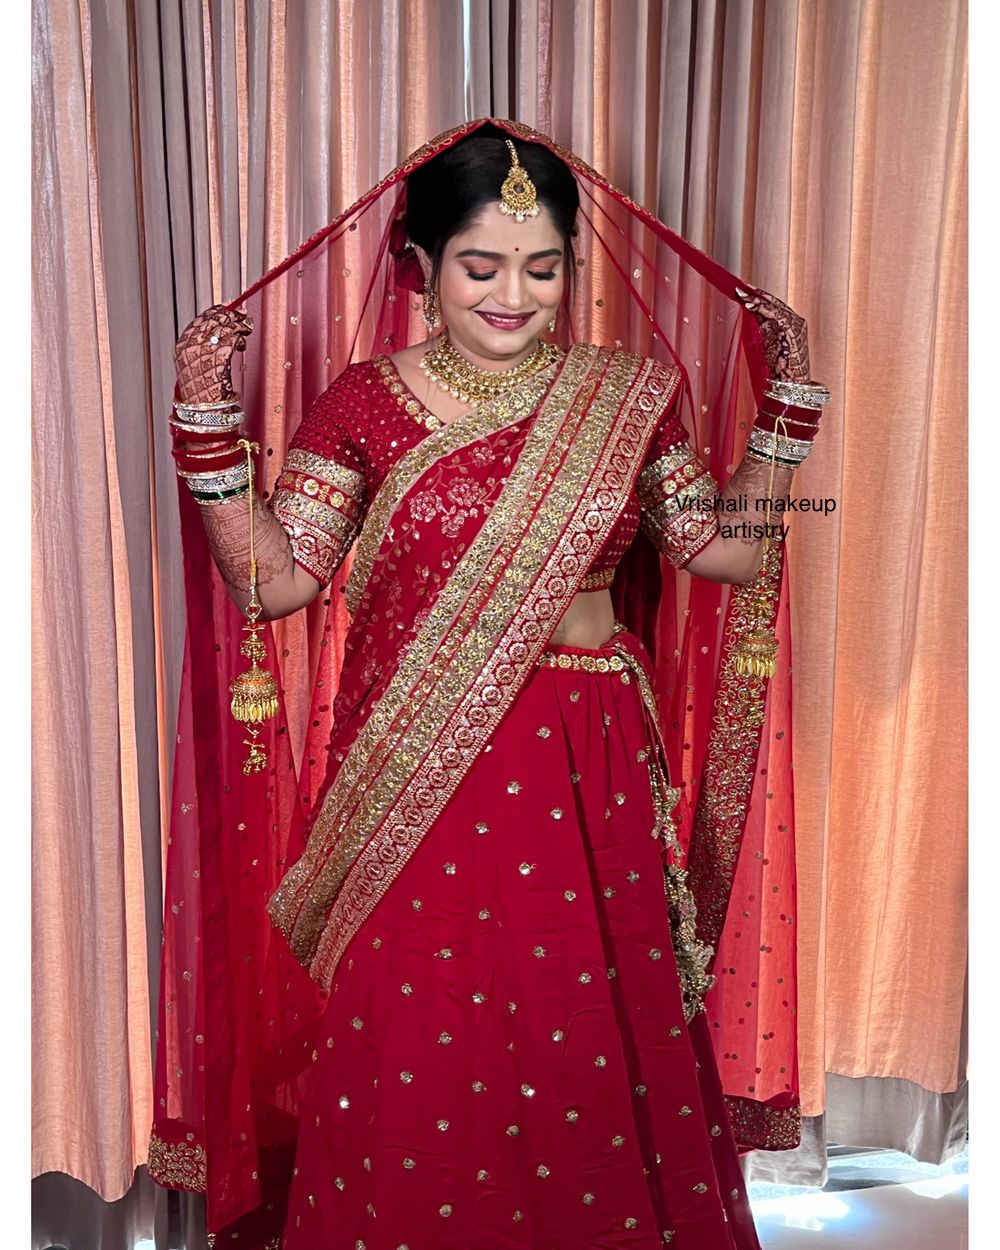 Photo From Purva Wedding Look - By Vrishali Makeup Artistry